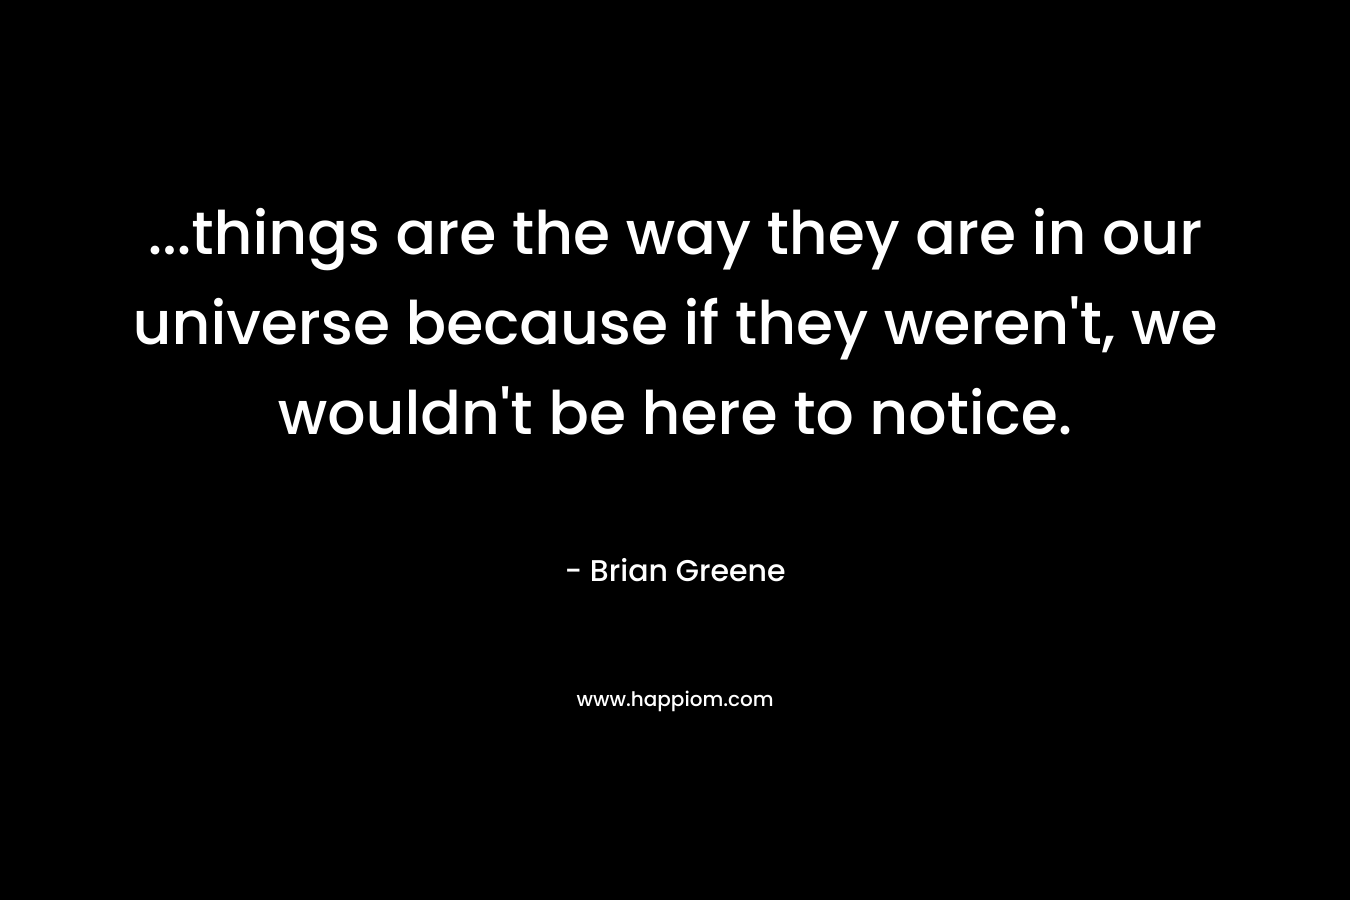 ...things are the way they are in our universe because if they weren't, we wouldn't be here to notice.